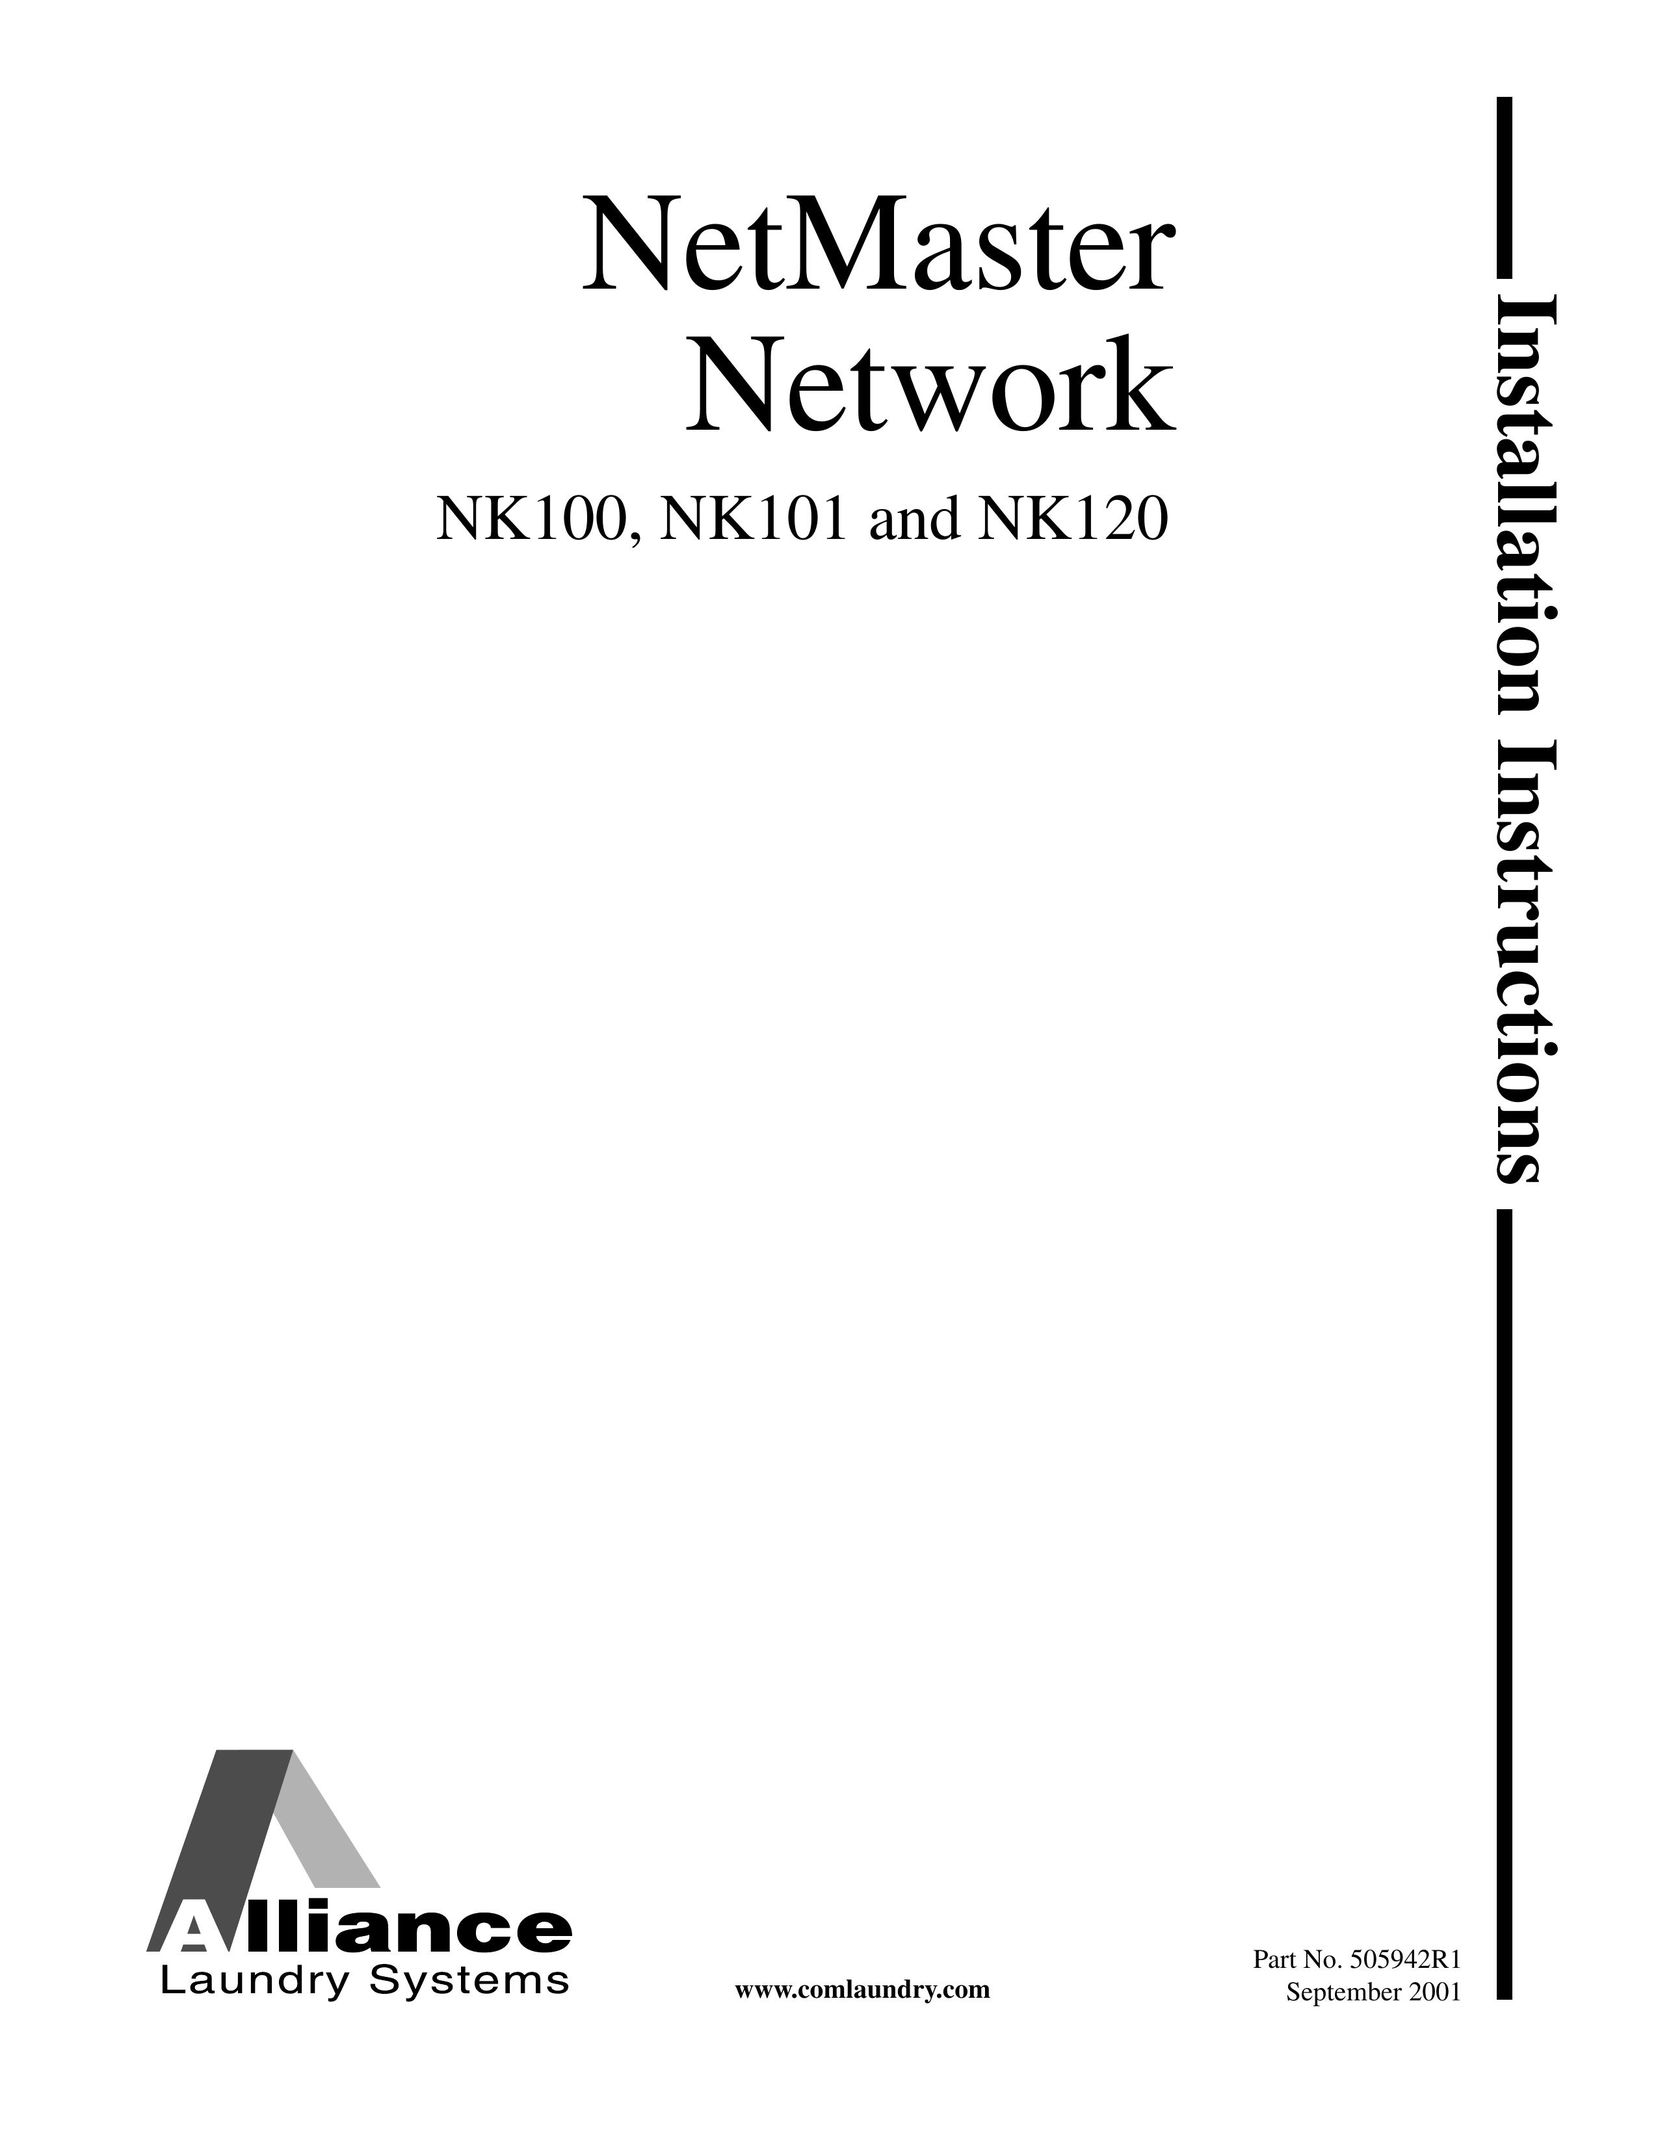 Alliance Laundry Systems NK100 Network Hardware User Manual (Page 1)